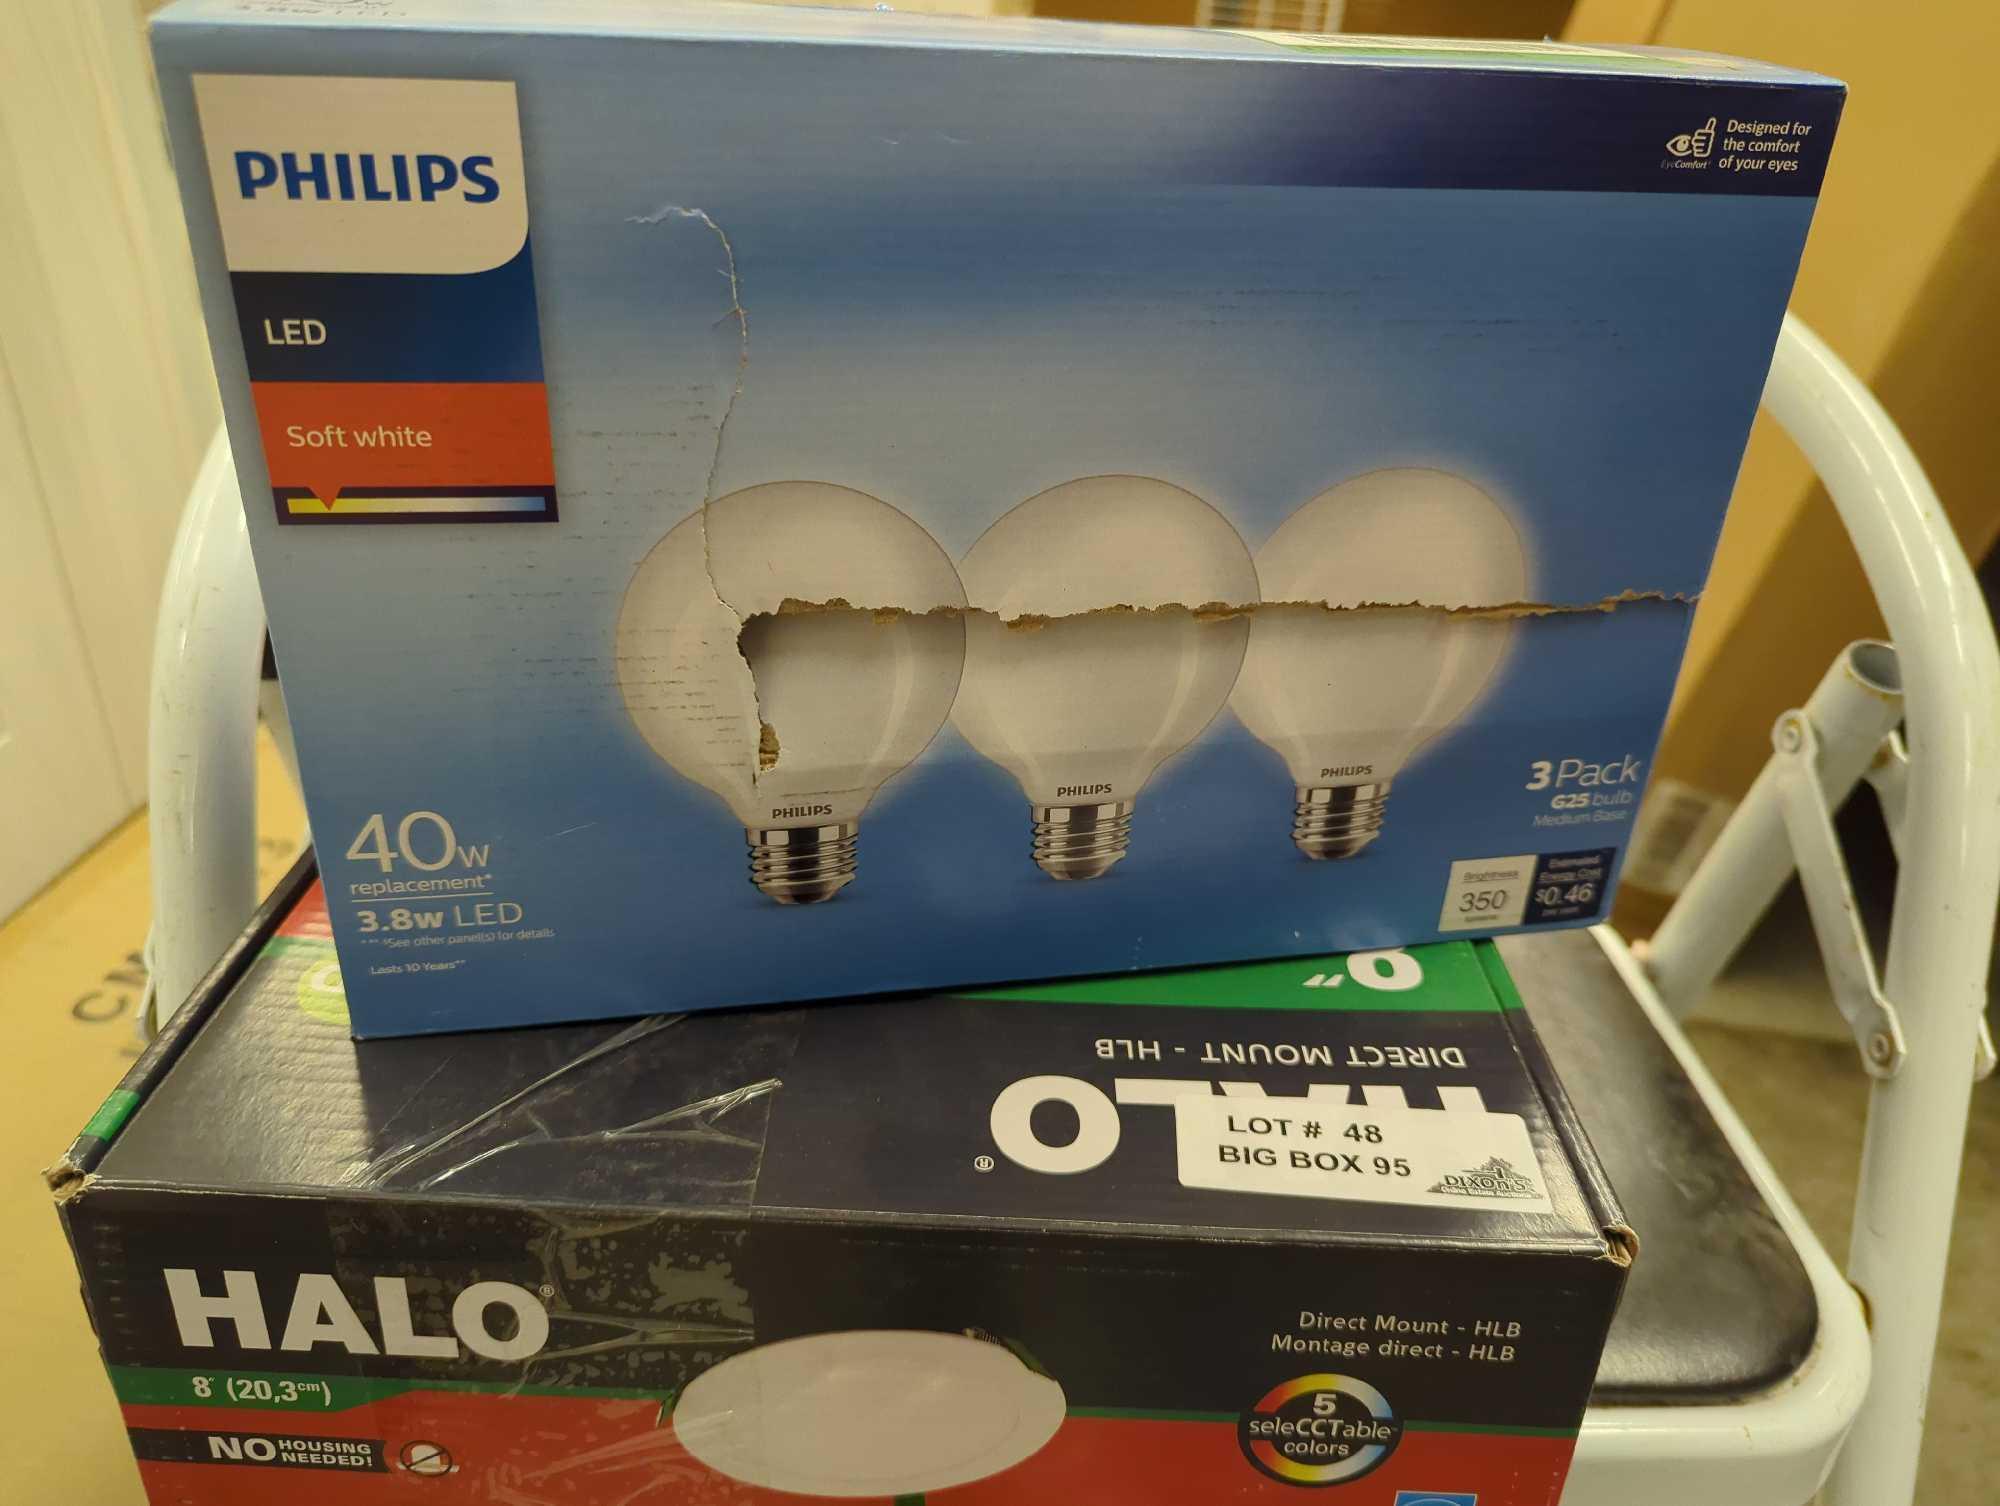 Lot of 2 Items To Include Philips 40w 3.8w LED Soft White Set of 3, Halo 8 inch Direct Mount Ultra